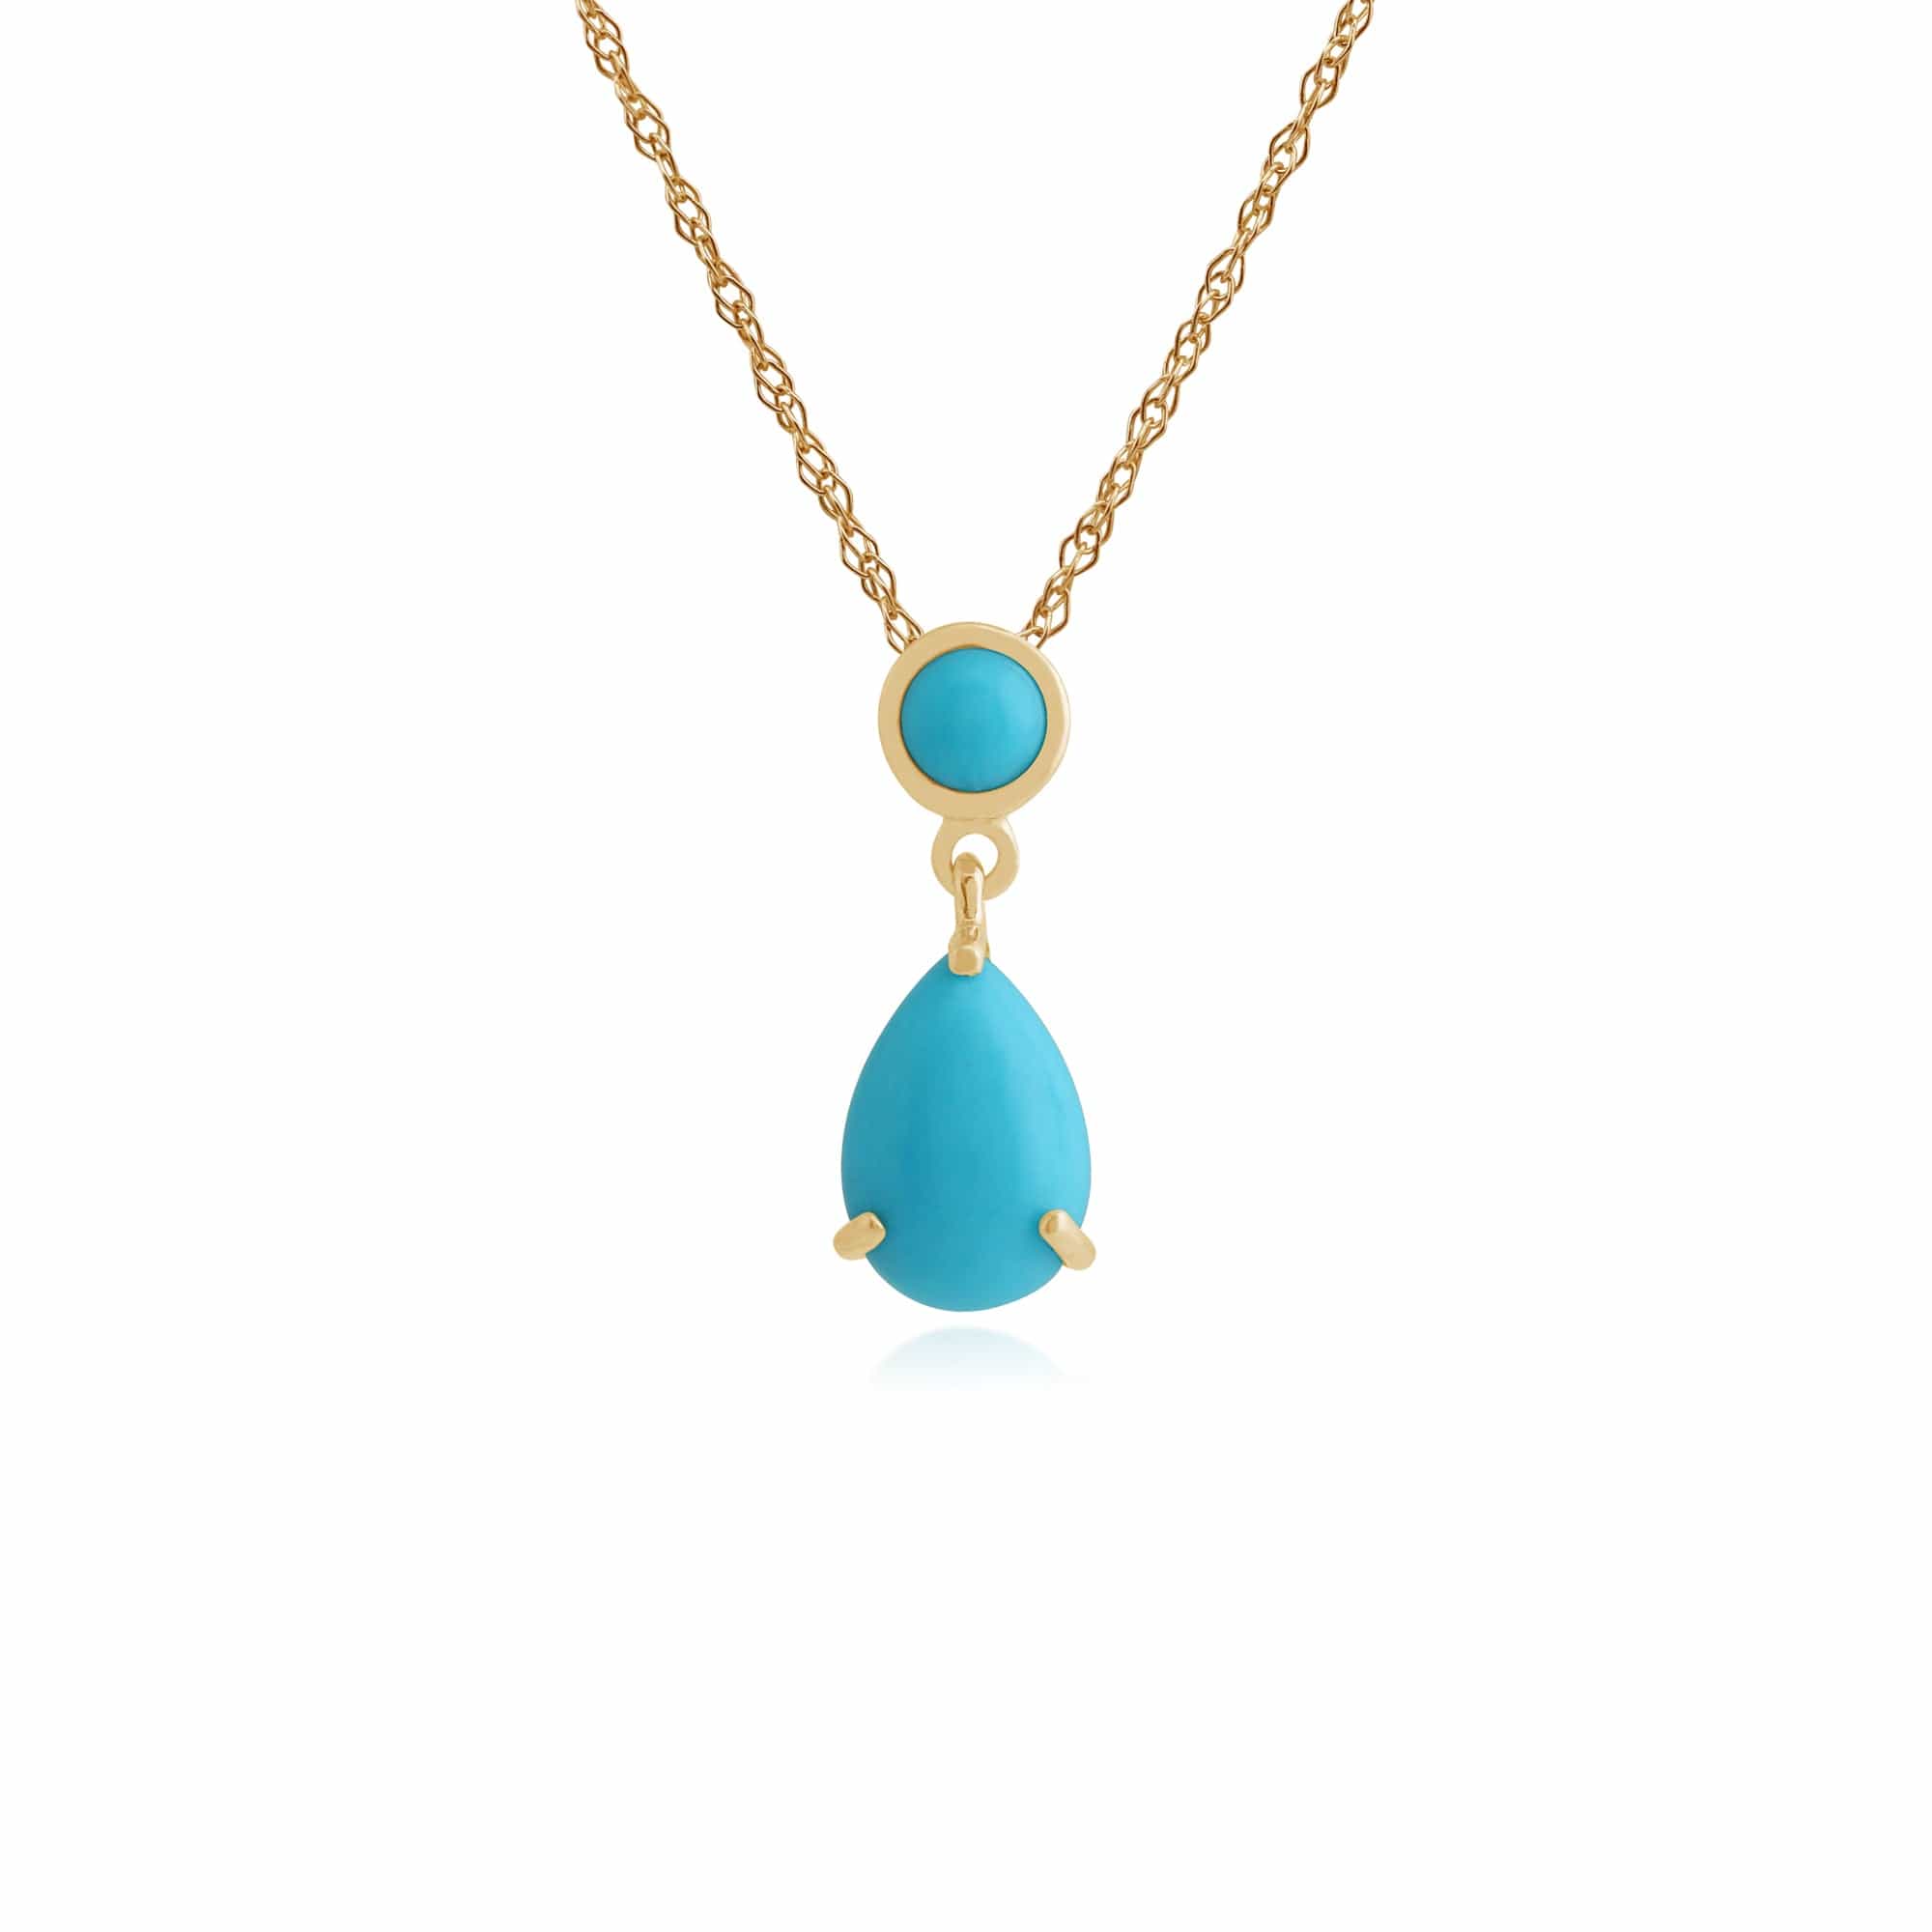 Classic Pear & Round Turquoise Drop Earrings & Pendant Set in 9ct Yellow Gold - Gemondo